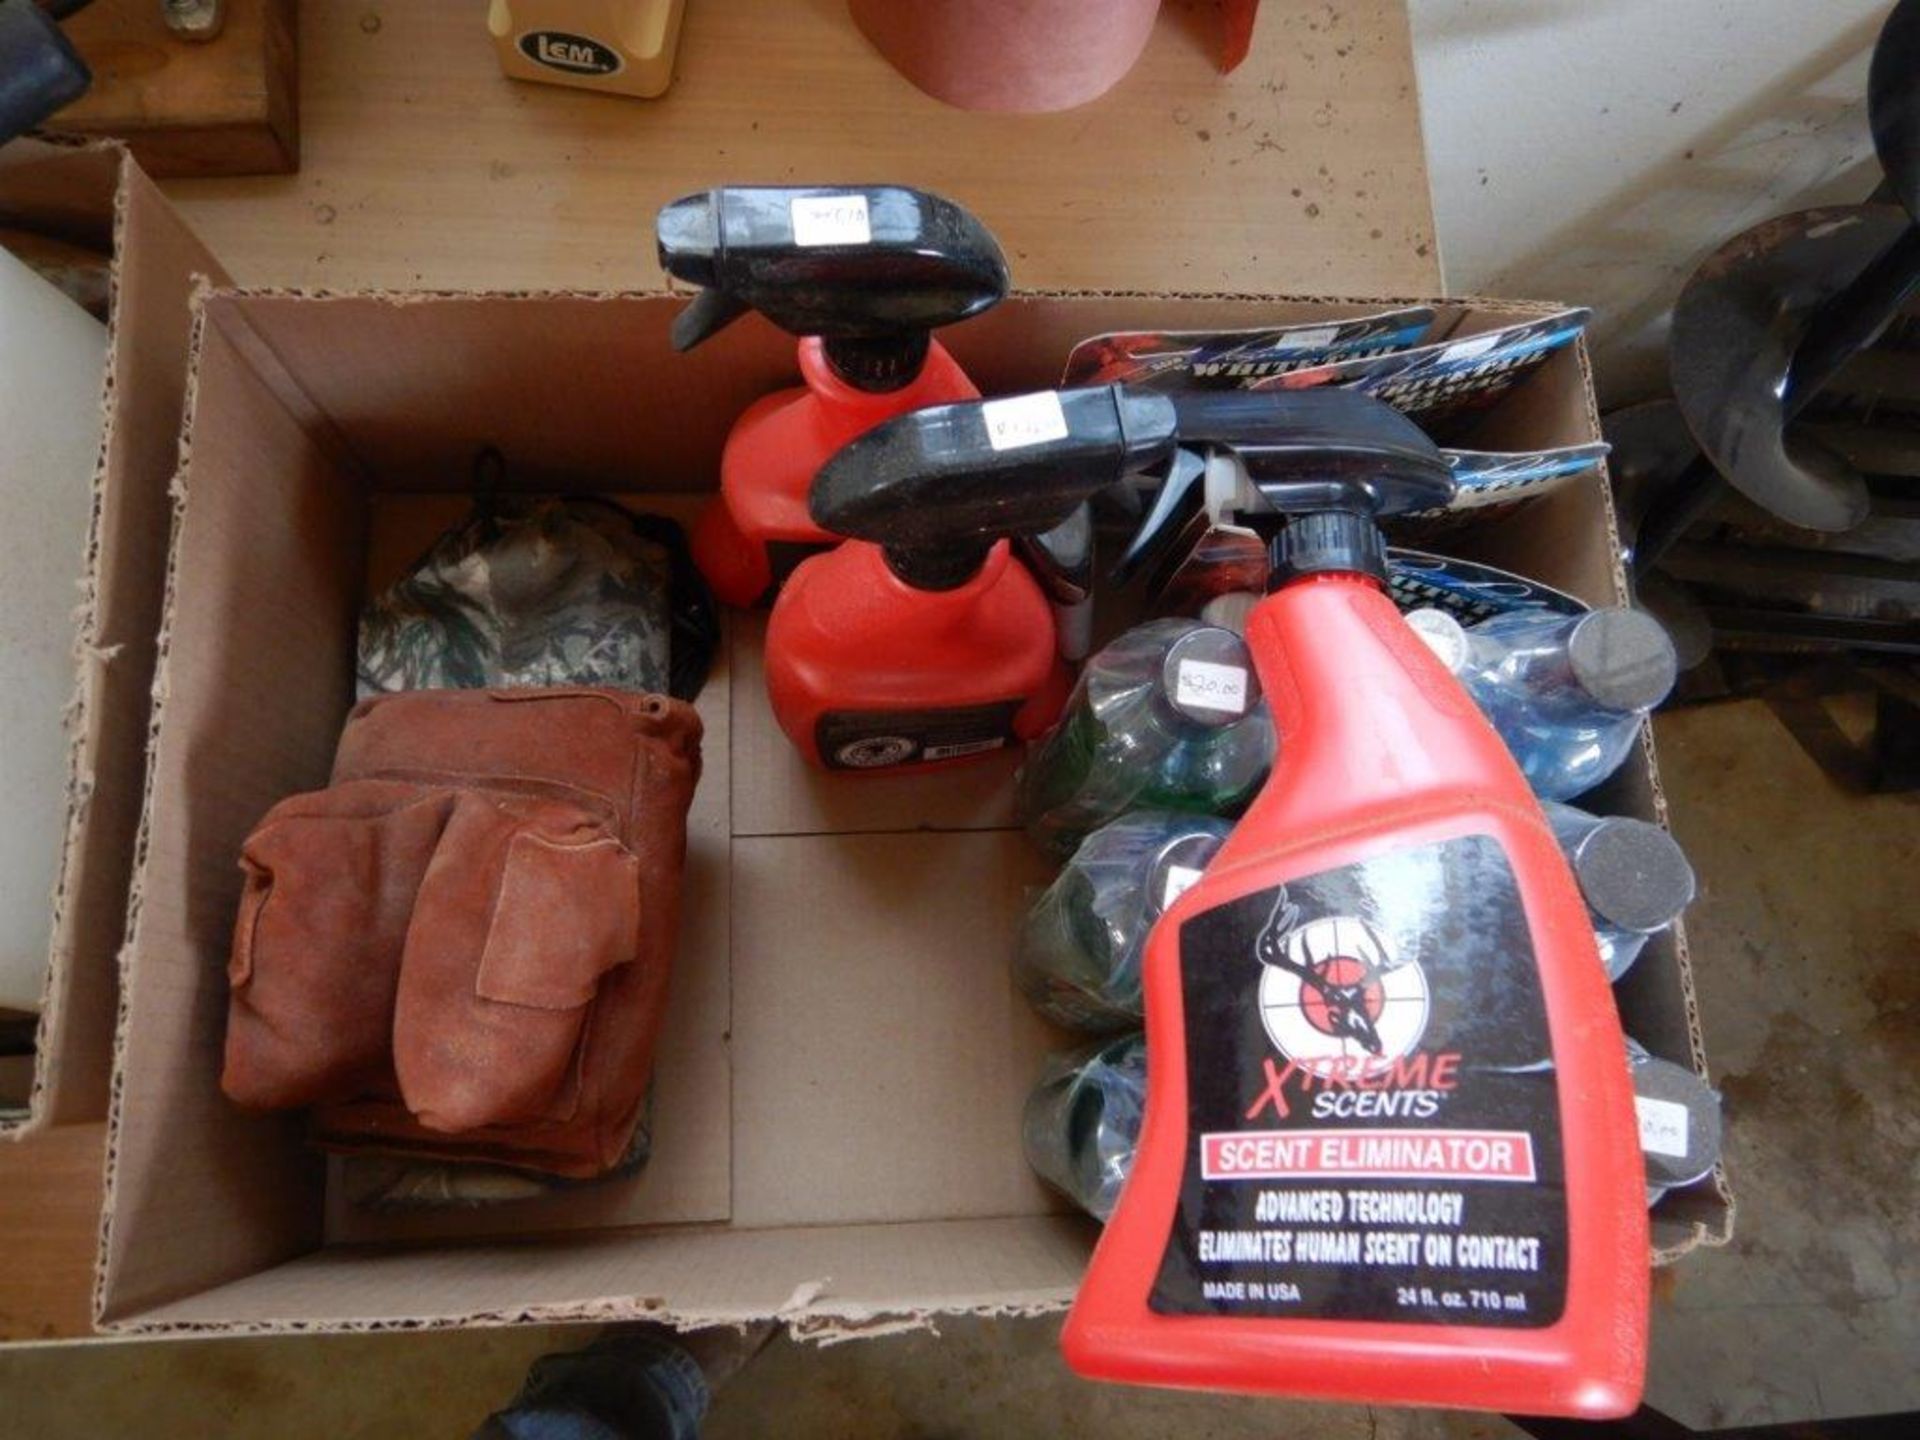 L/O ASSORTED HUNTING ITEMS INCLUDING XTREME SCENTS, SCENT ELIMINATORS, ETC - Image 3 of 3